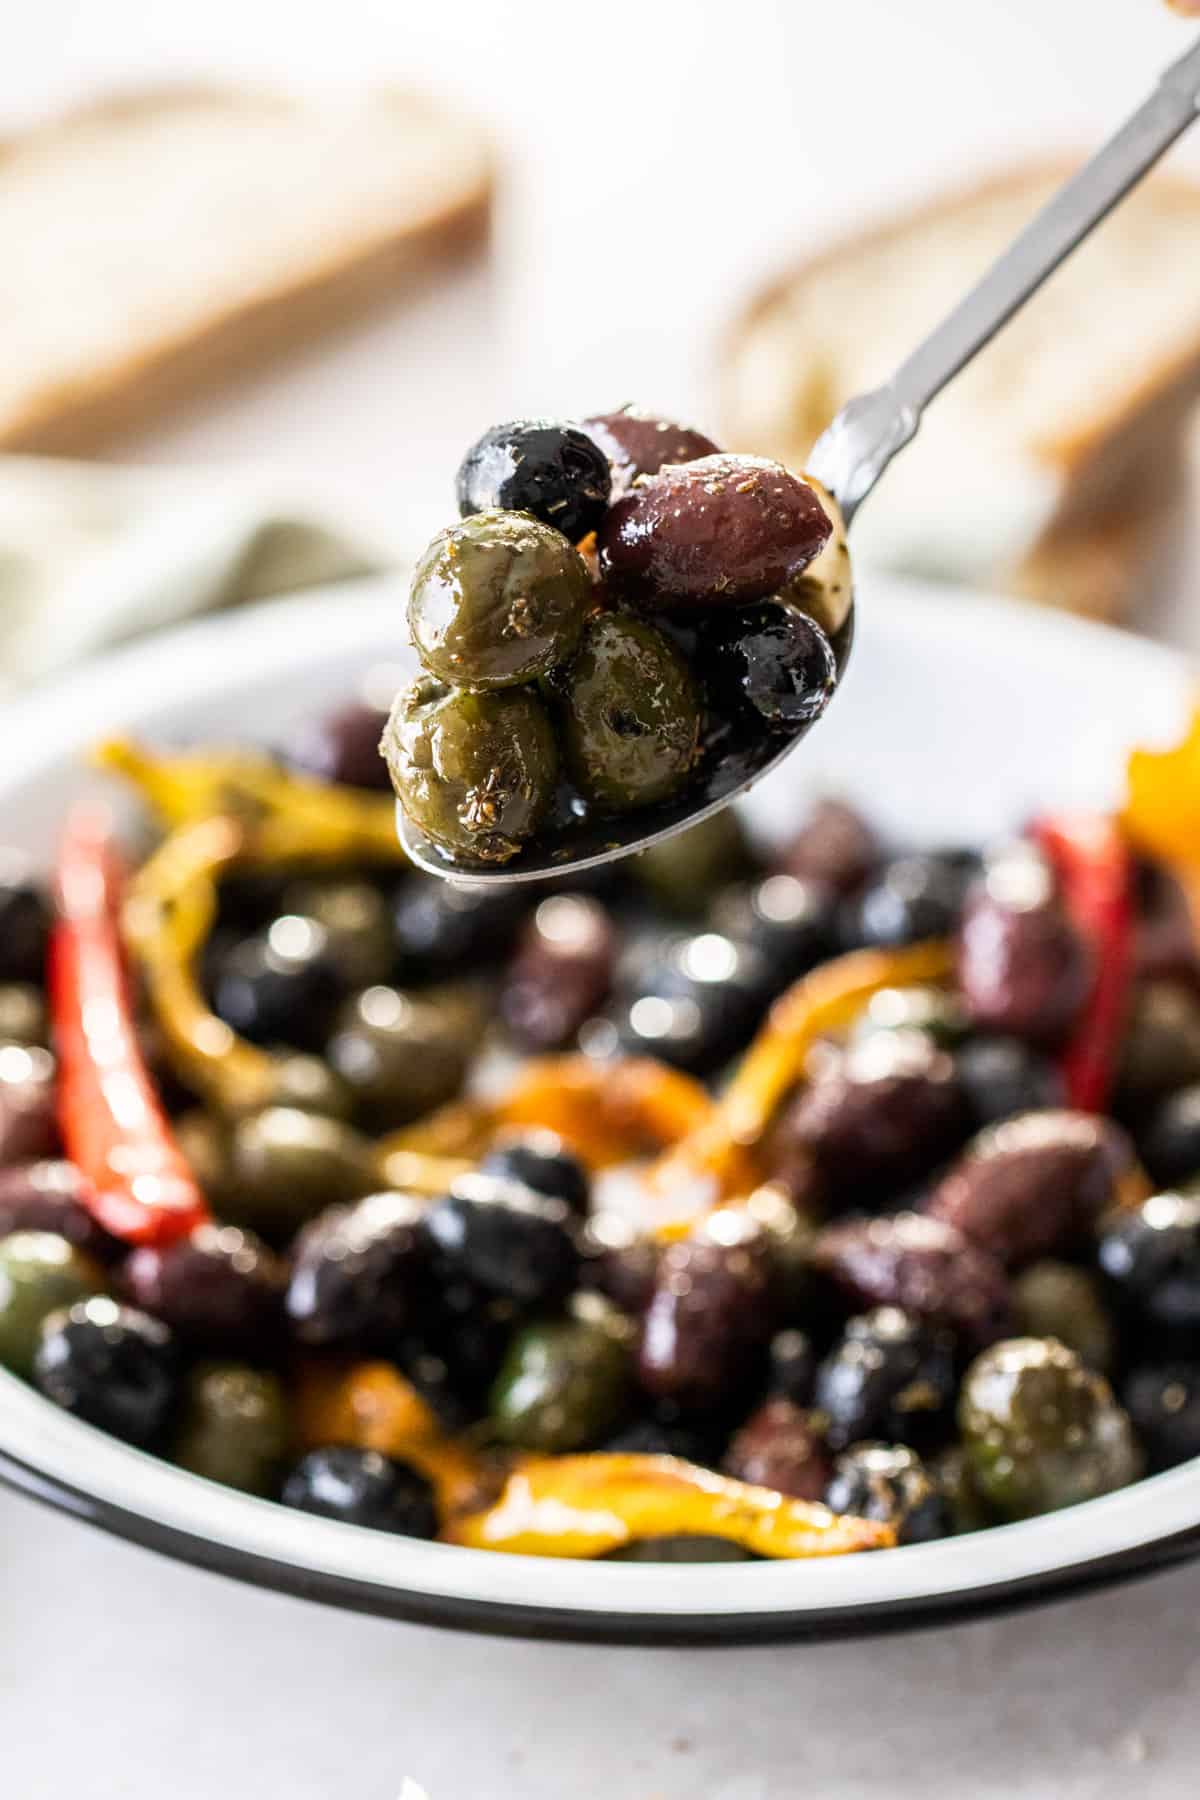 Spoon holding up a scoop of roasted olives, with the dish of olives in the background.